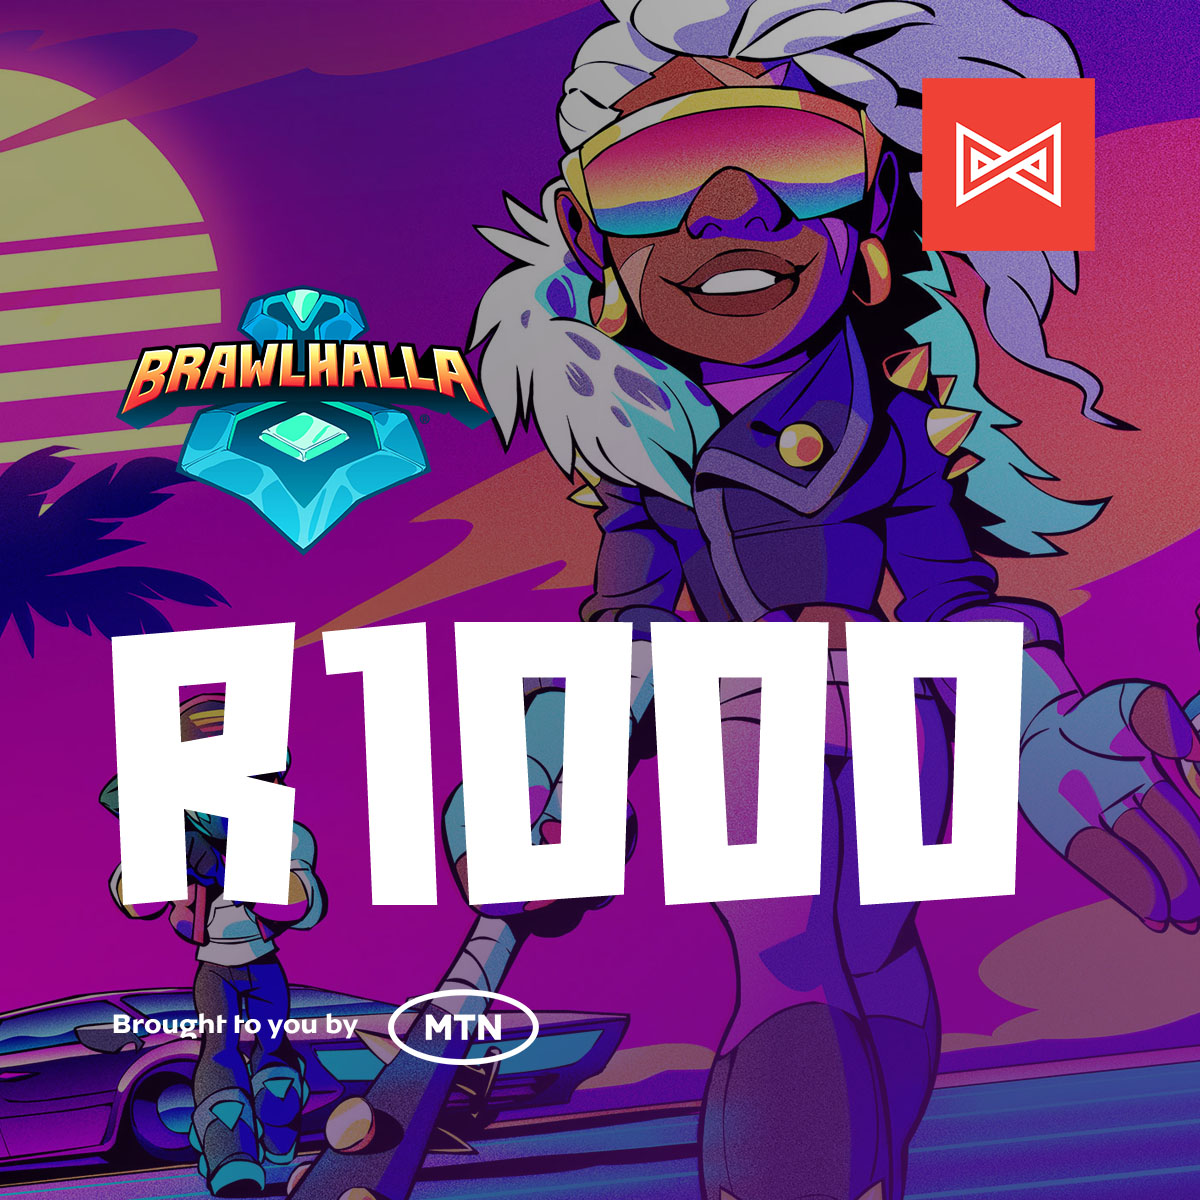 Get your game on in today's #Brawlhalla casual cup! ⚔️🏆 Check-ins open at 18:30CAT over on our Discord discord.gg/mettlestate! 🕡🎮 Sign up here before closure at 18:00CAT 👉 tinyurl.com/4pr9bcnh Brought to you by @MTNza  #ForgeGaming #CasualCups